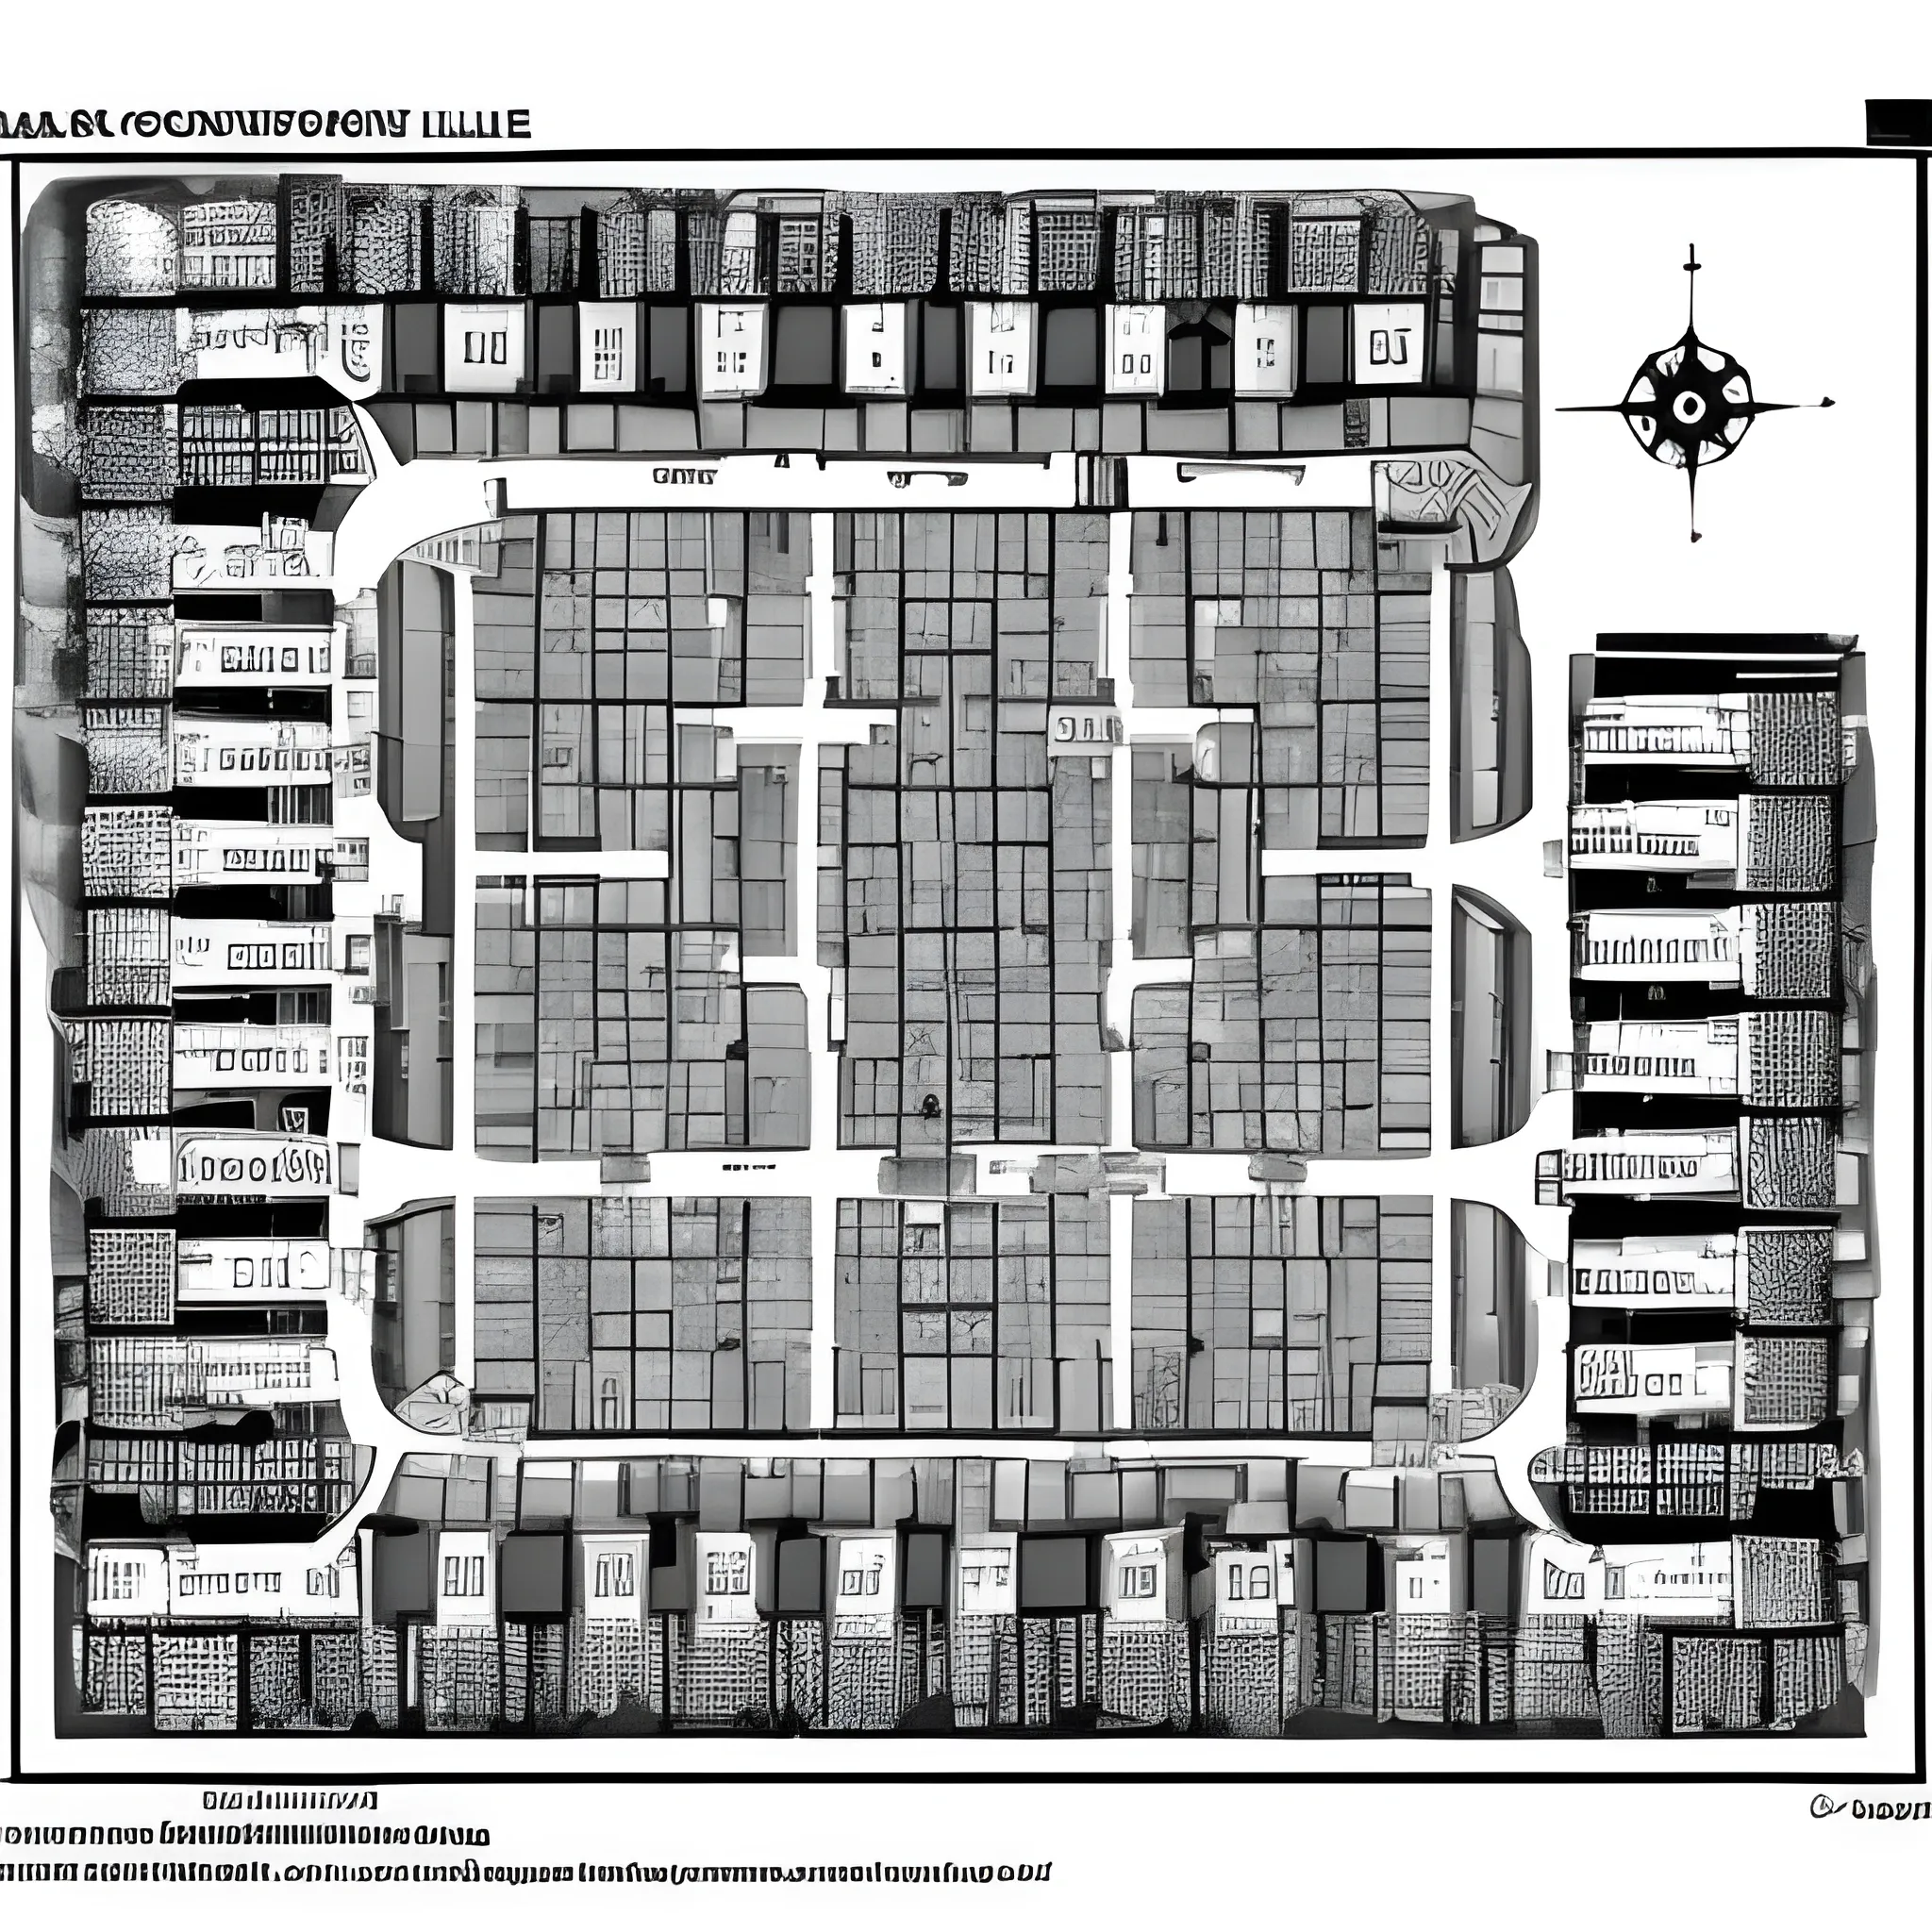 black and white map of a complex facility with many corridors and room